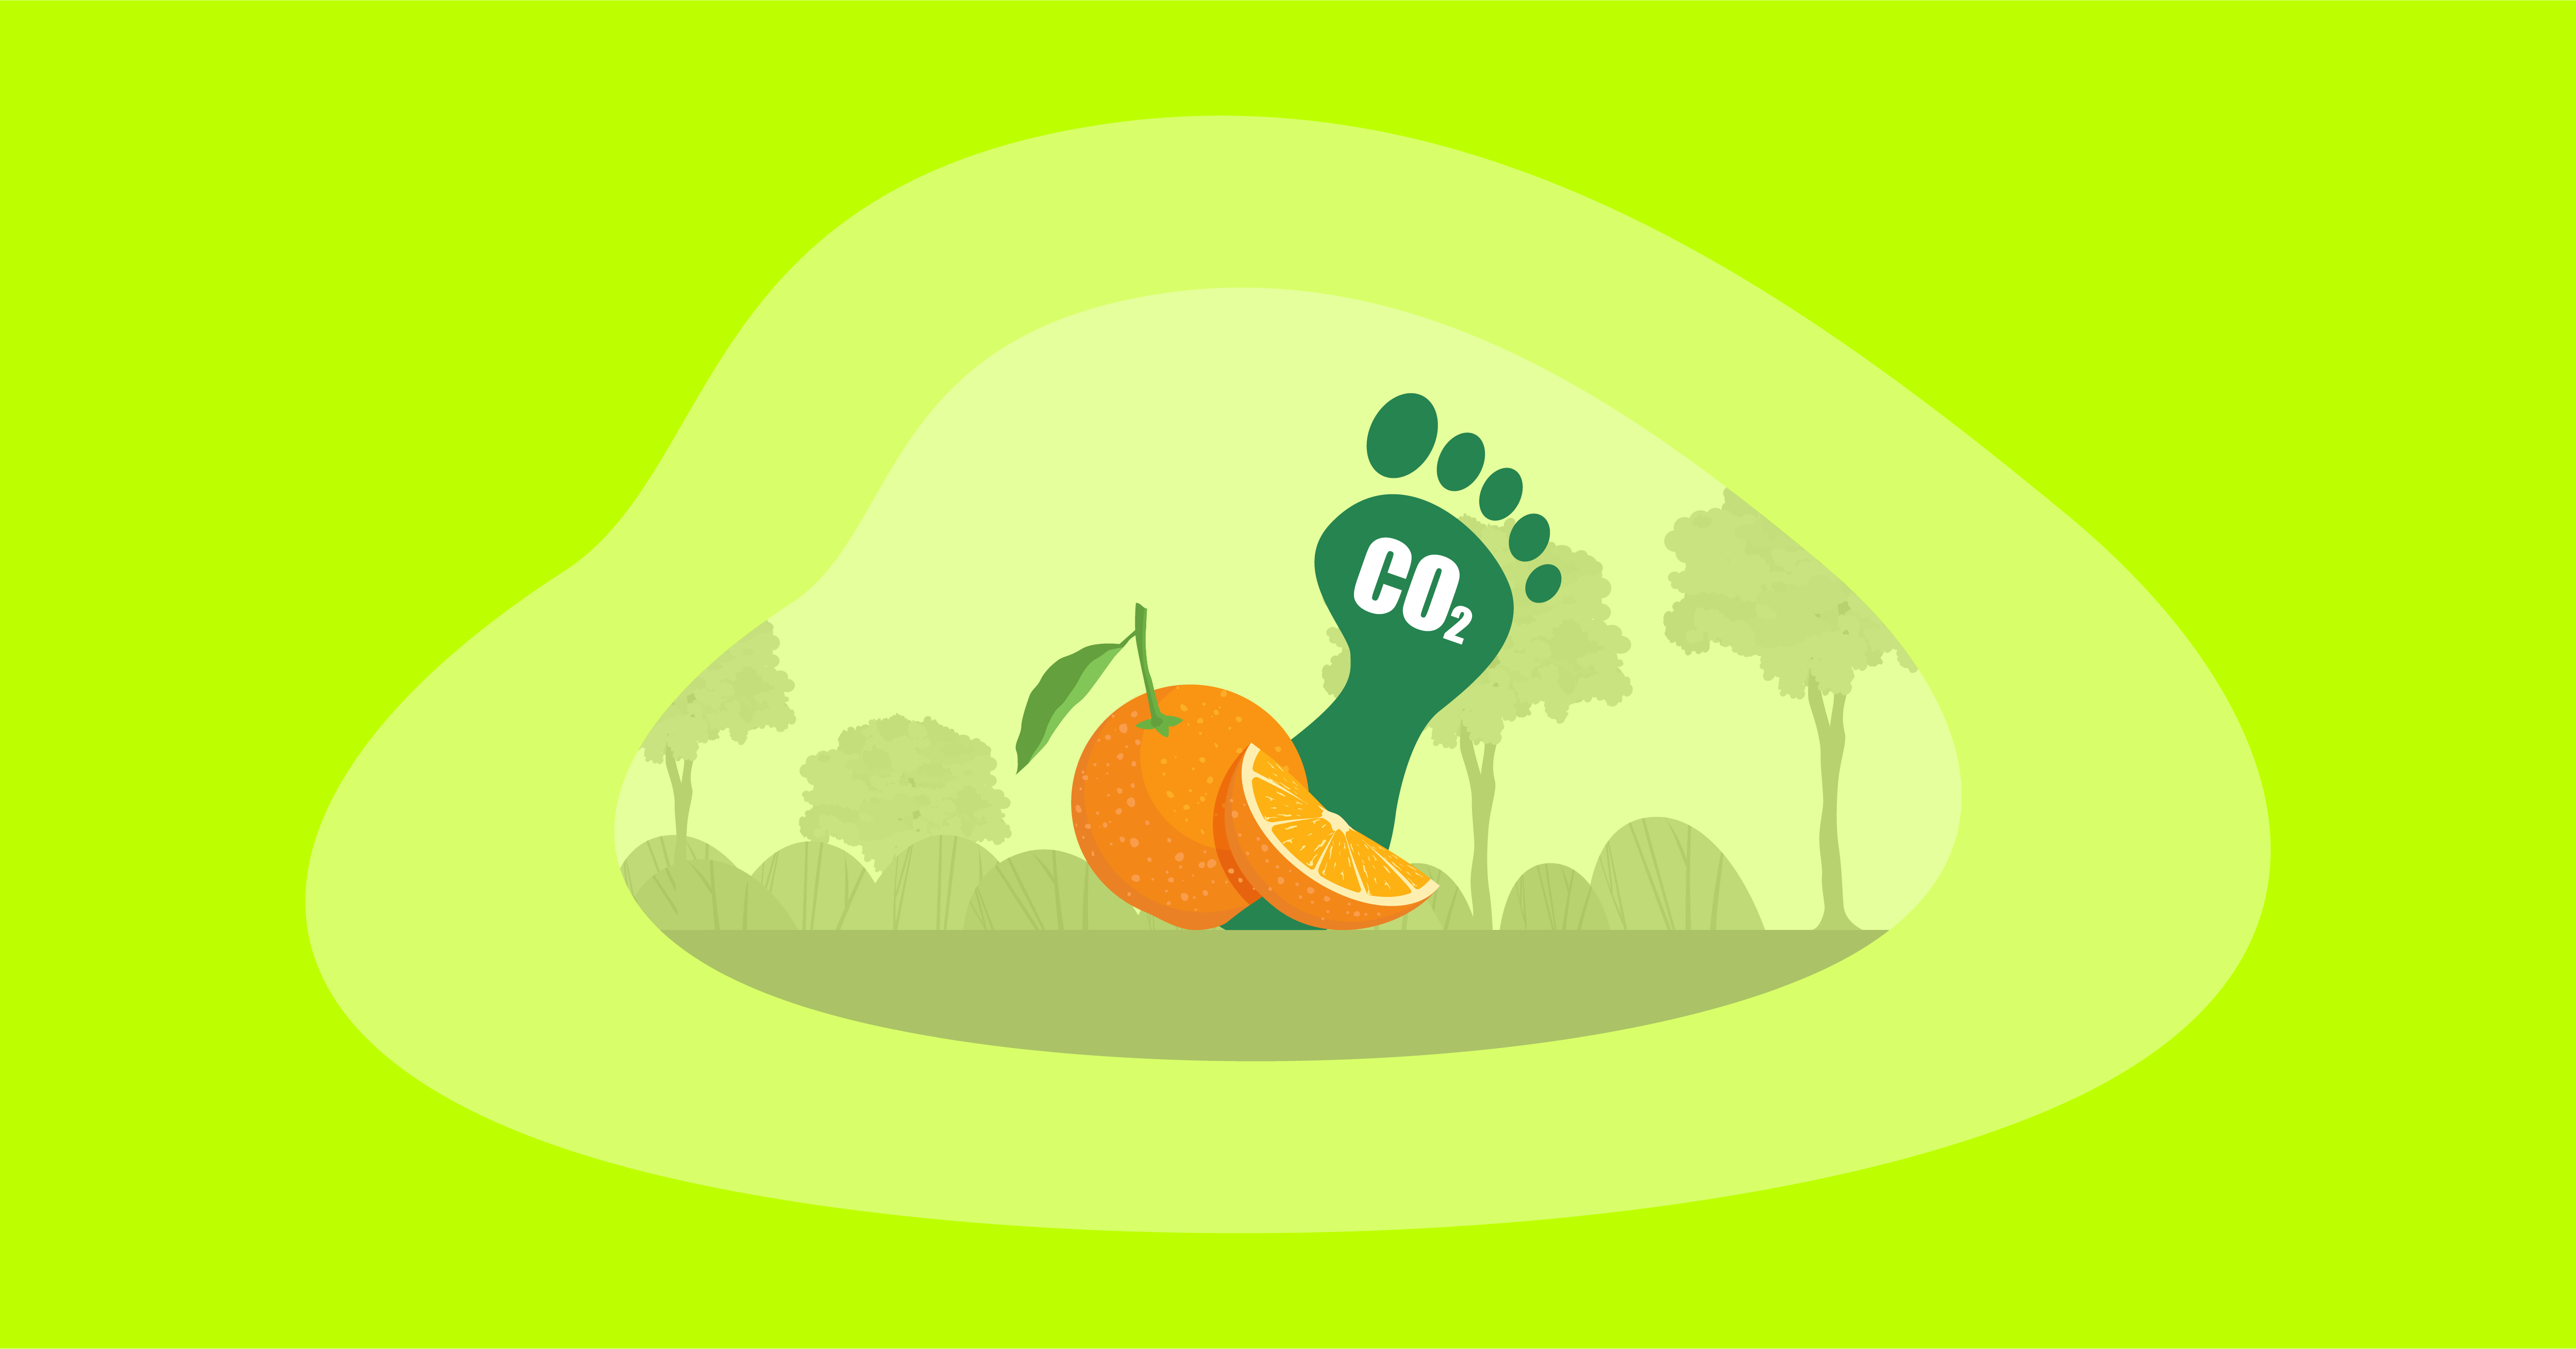 Attempted illustration of oranges with their carbon footprint